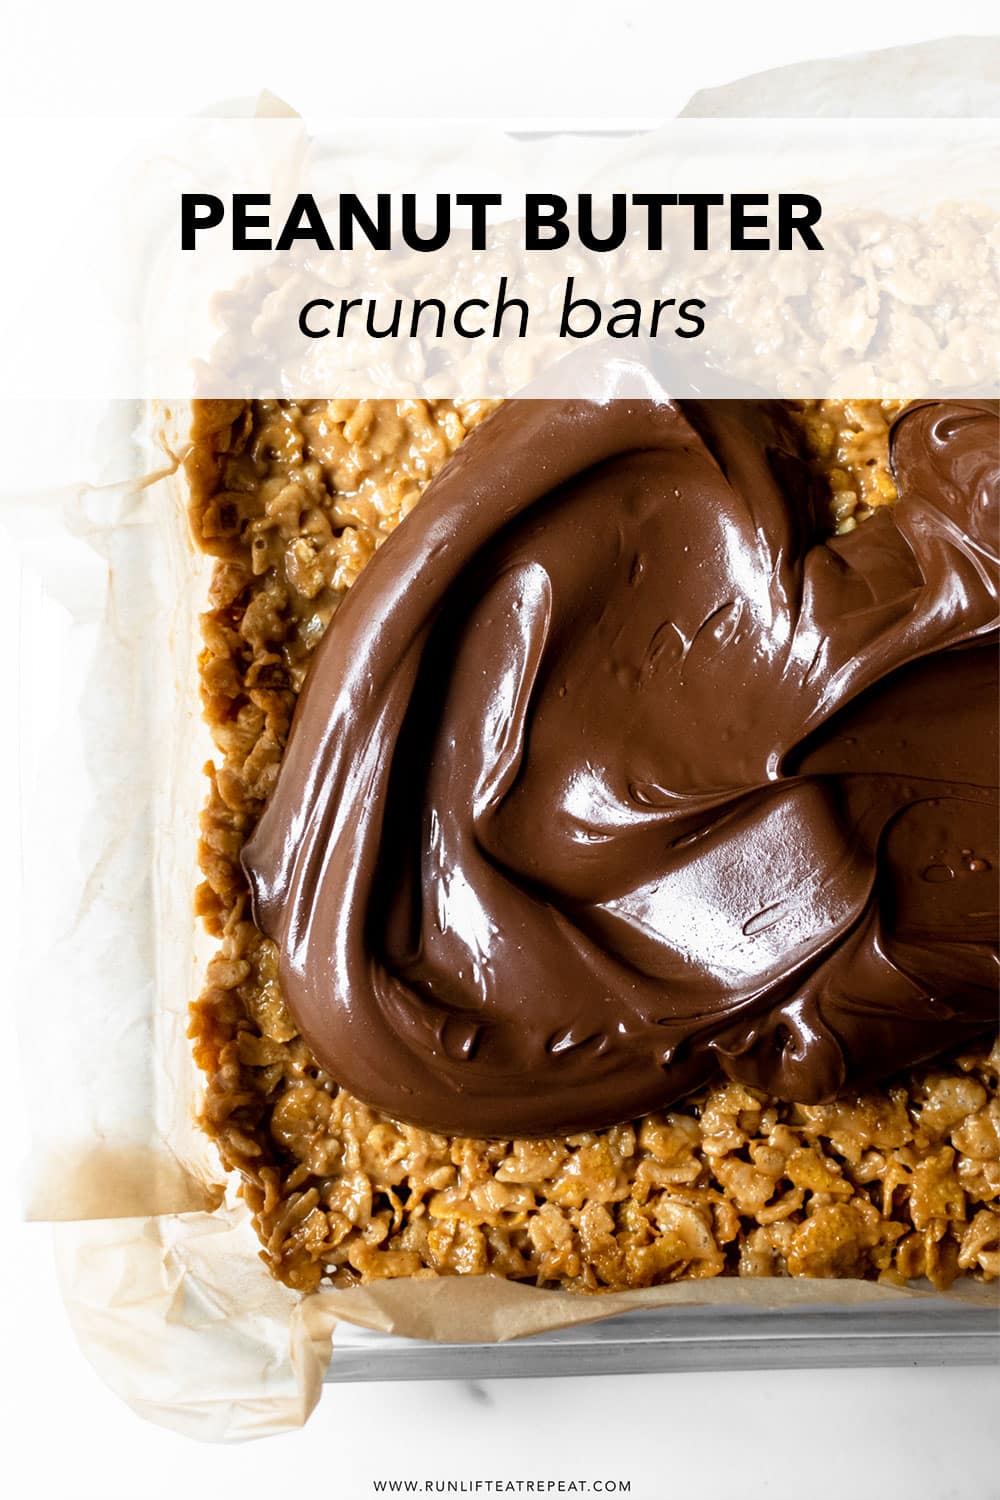 Made from just 8 ingredients, these no-bake chocolate peanut butter crunch bars are chewy, crispy, and irresistible. These are a delicious treat anytime of the year. No oven required! Warning: these bars are incredibly addicting.